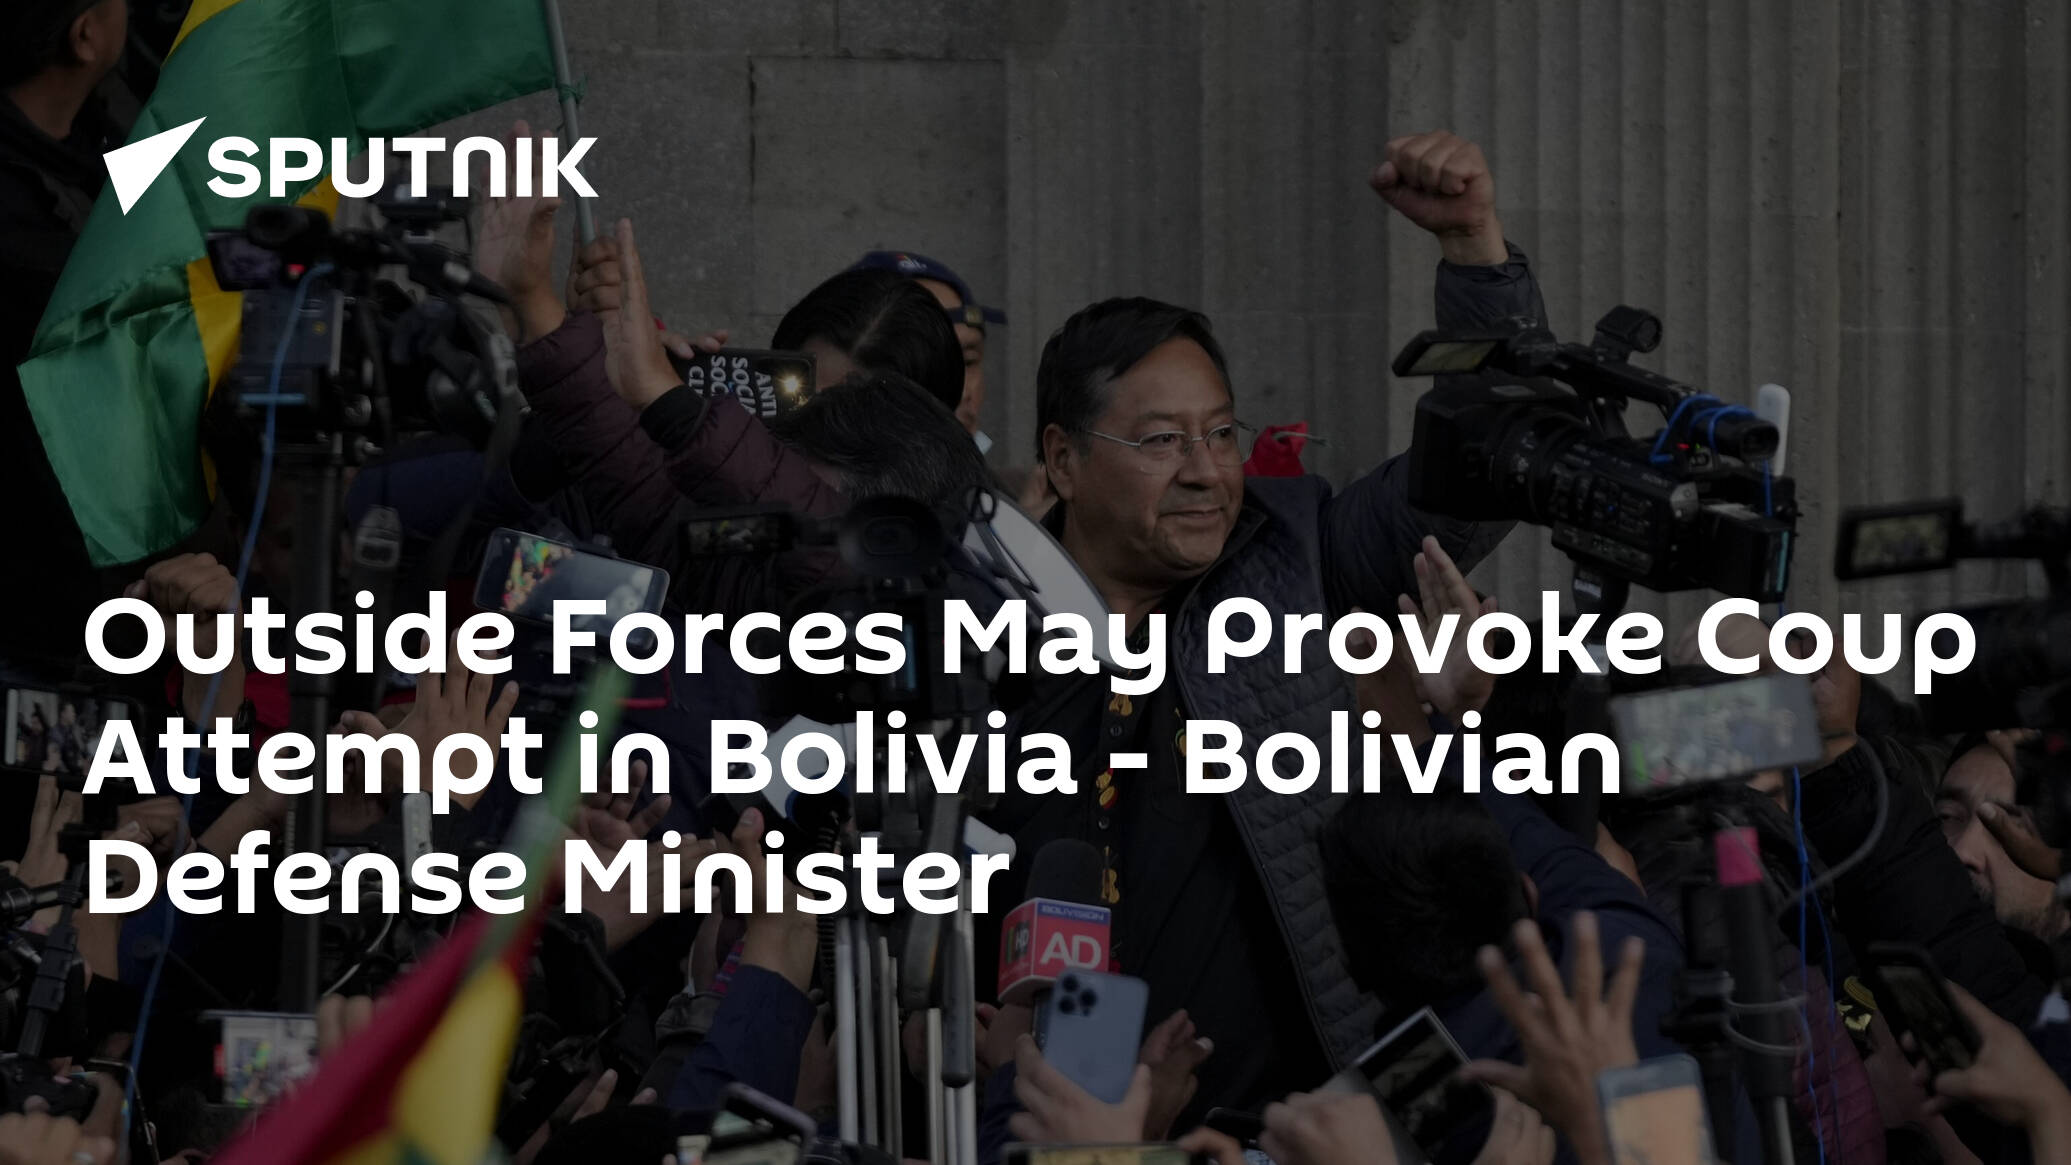 Outside Forces May Provoke Coup Attempt in Bolivia - Bolivian Defense Minister